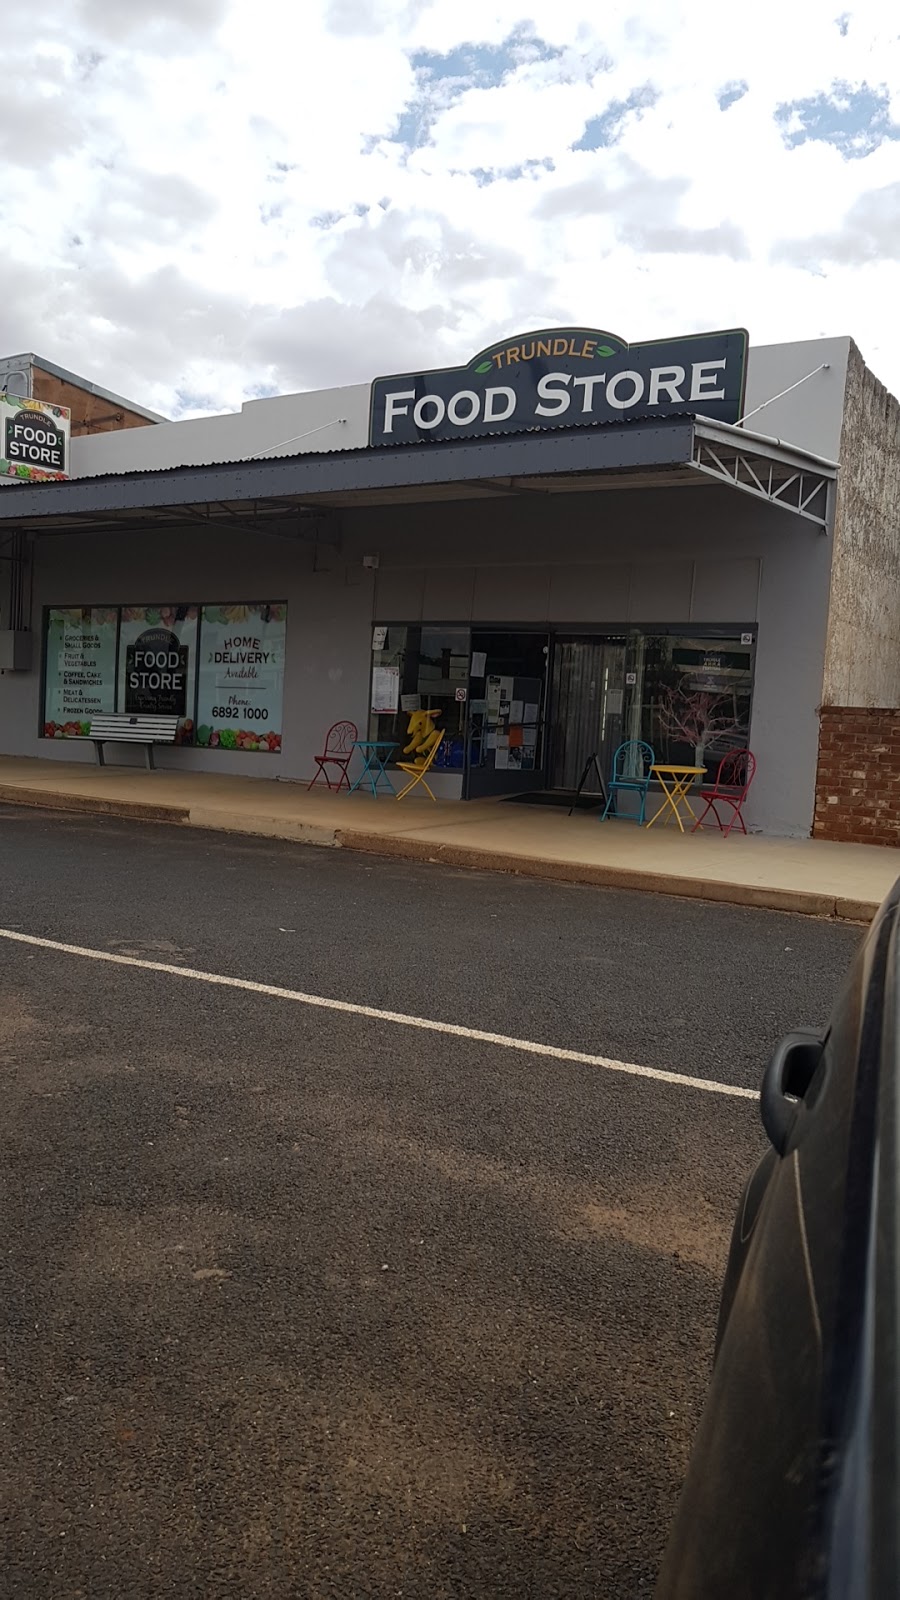 Food Store | store | 50 Forbes St, Trundle NSW 2875, Australia | 68921000 OR +61 68921000